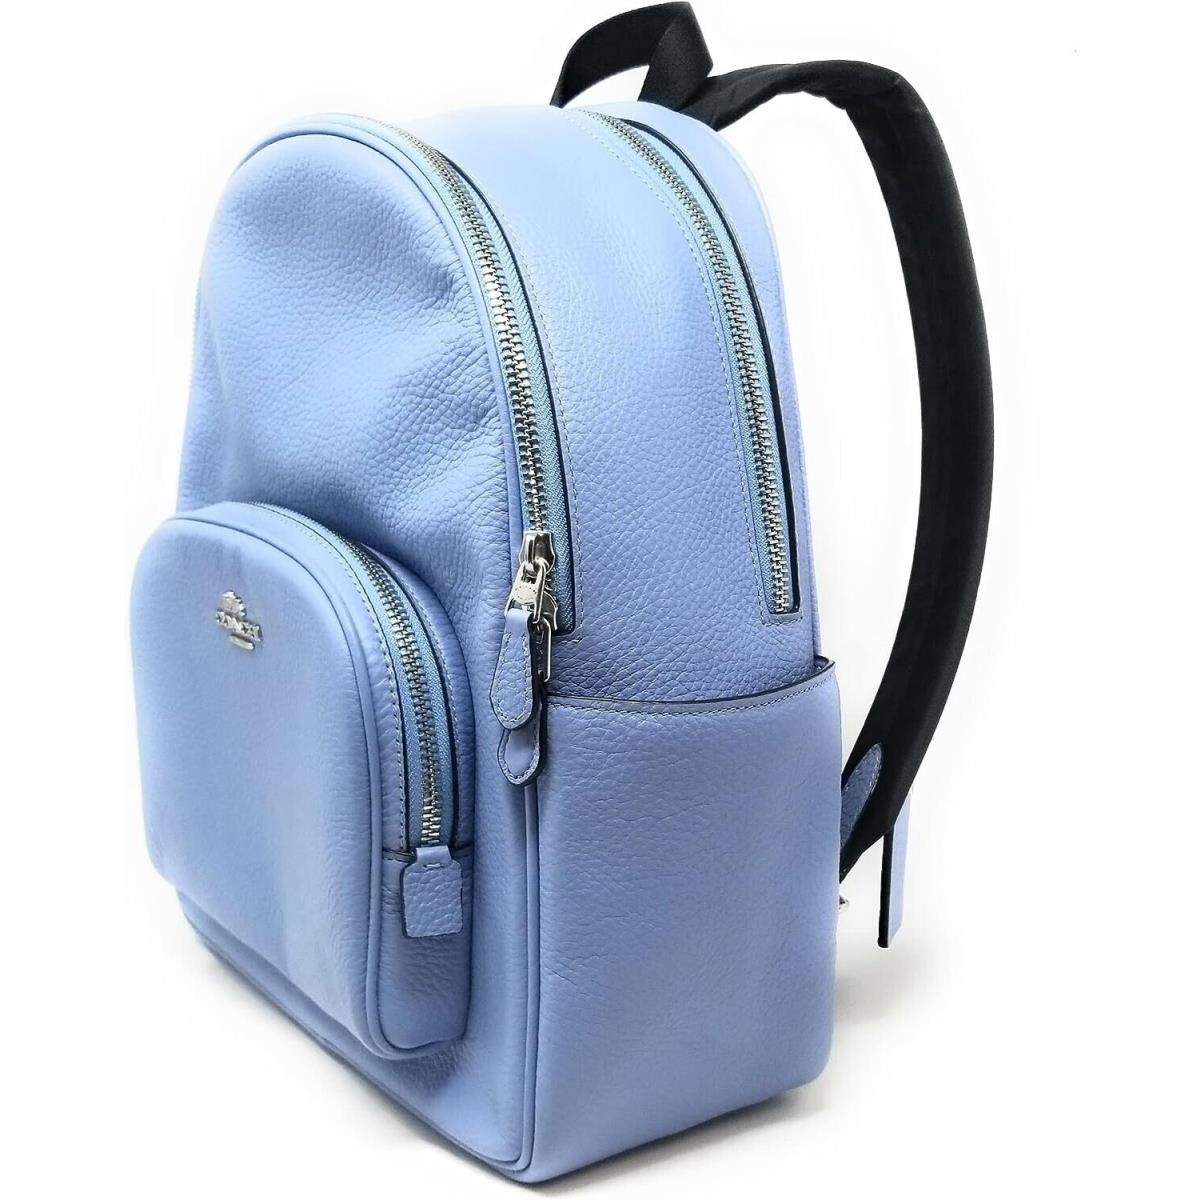 Coach Women`s Leather Court Backpack in Marble Blue - Hardware: Silver, Handle/Strap: Black, Exterior: Blue